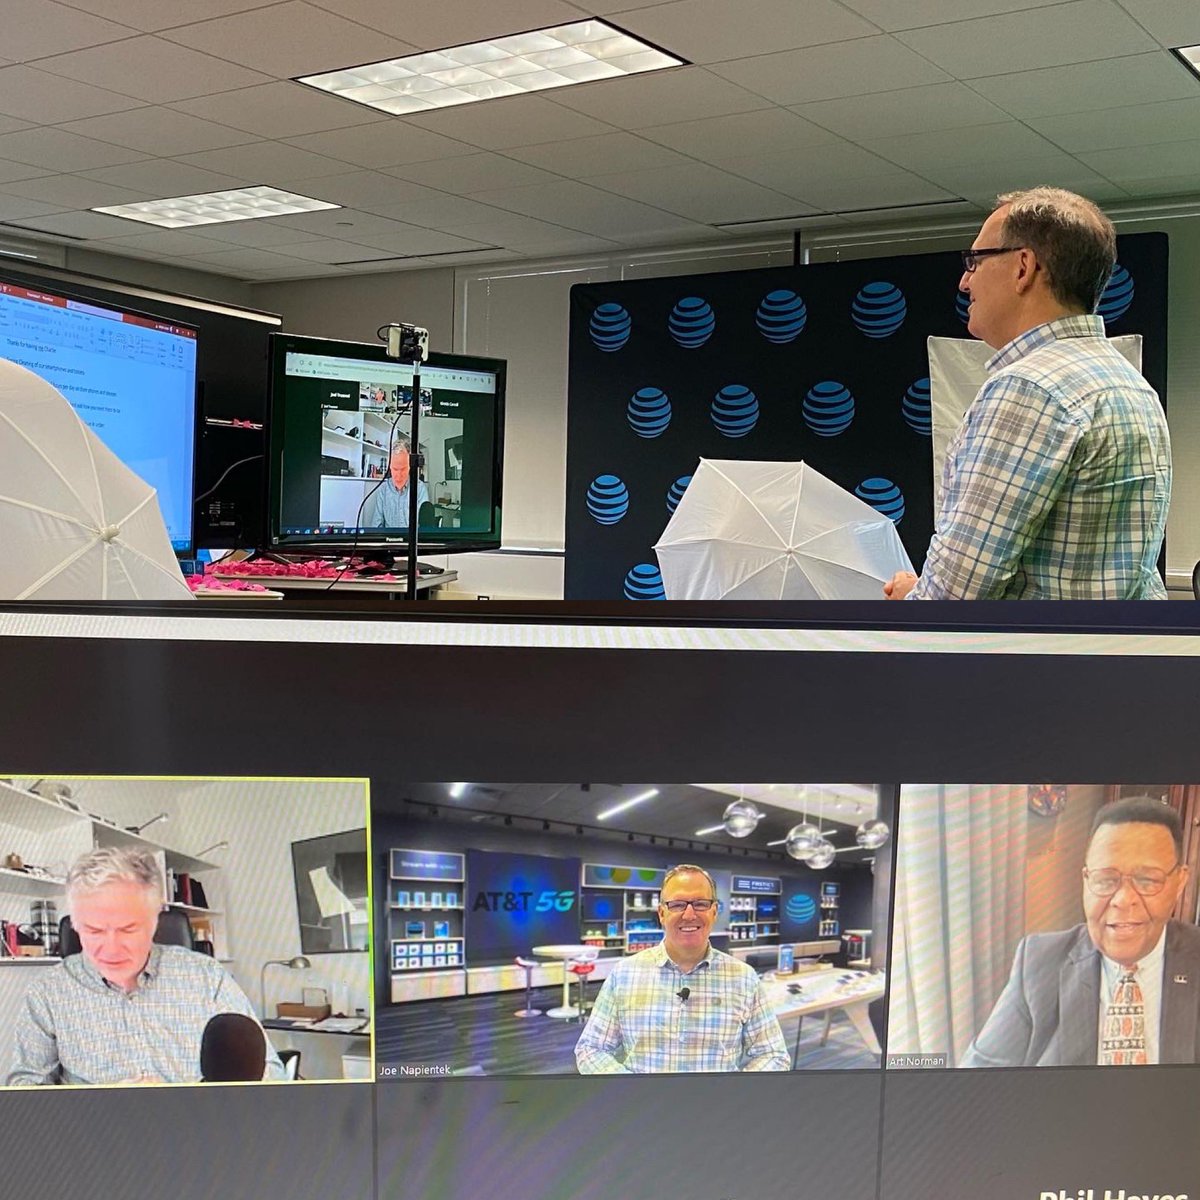 Thank you to these two Chicago NBC 5 News legends, Art Norman & Charlie Wojciechowski, for having me on their Tech Trends segment again! Representing @ATT to review how to do digital housecleaning on our smartphones. @GreaterLakesMkt #makingwaves @TomMonahan10